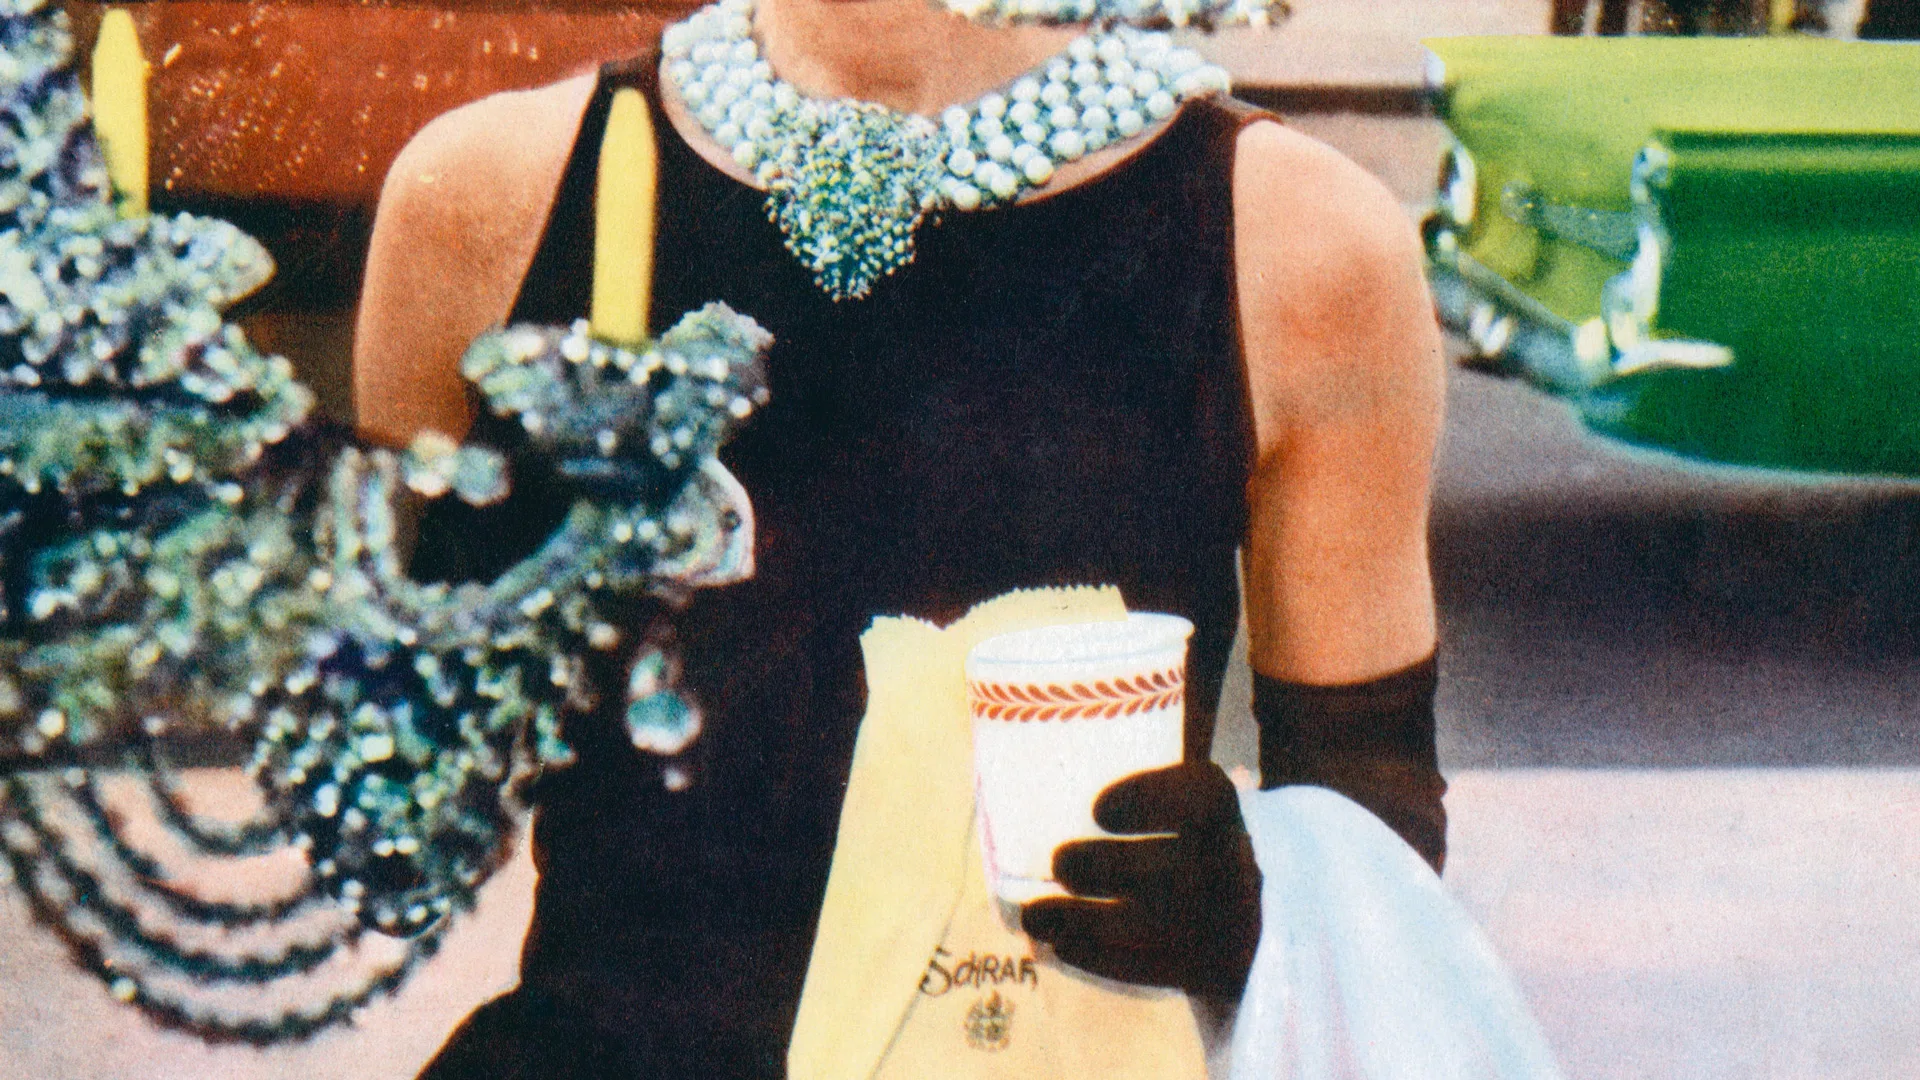 A photograph of a woman wearing a sparkly necklack and black dress holding a cup of coffee